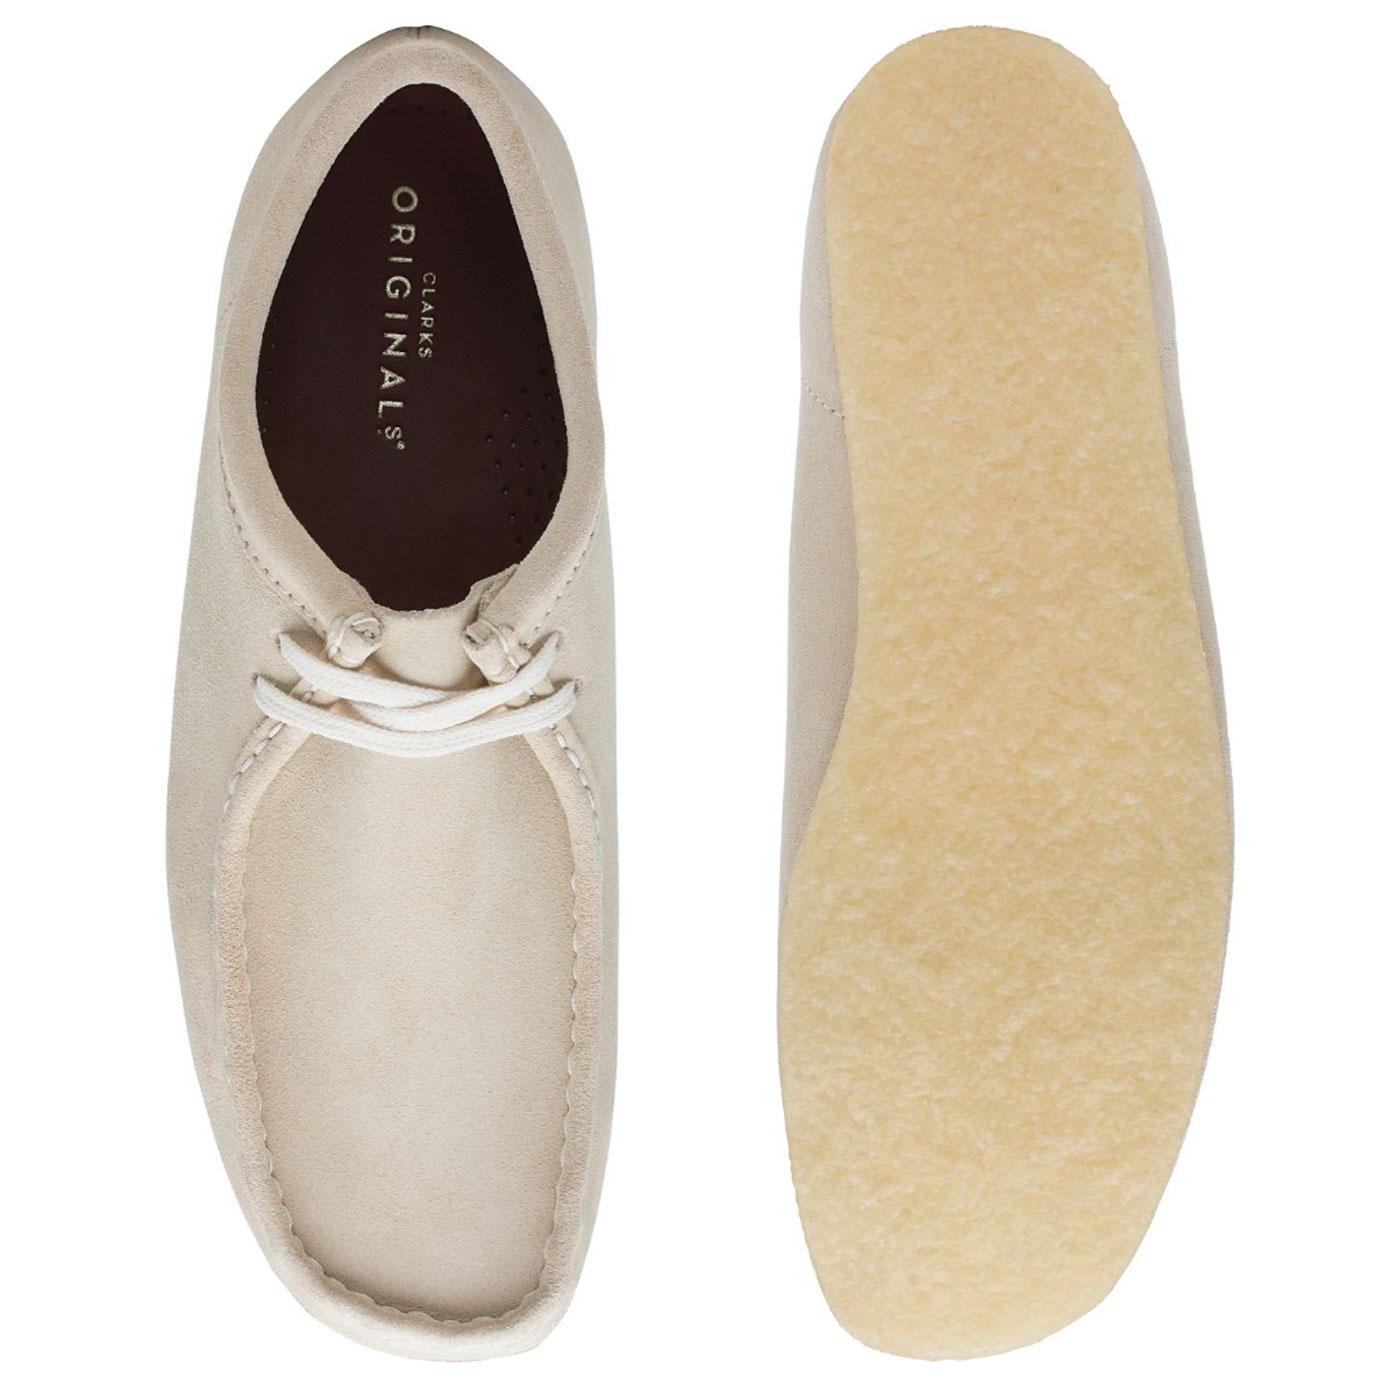 CLARKS ORIGINALS Wallabee Mod Moccasin Shoes Off White